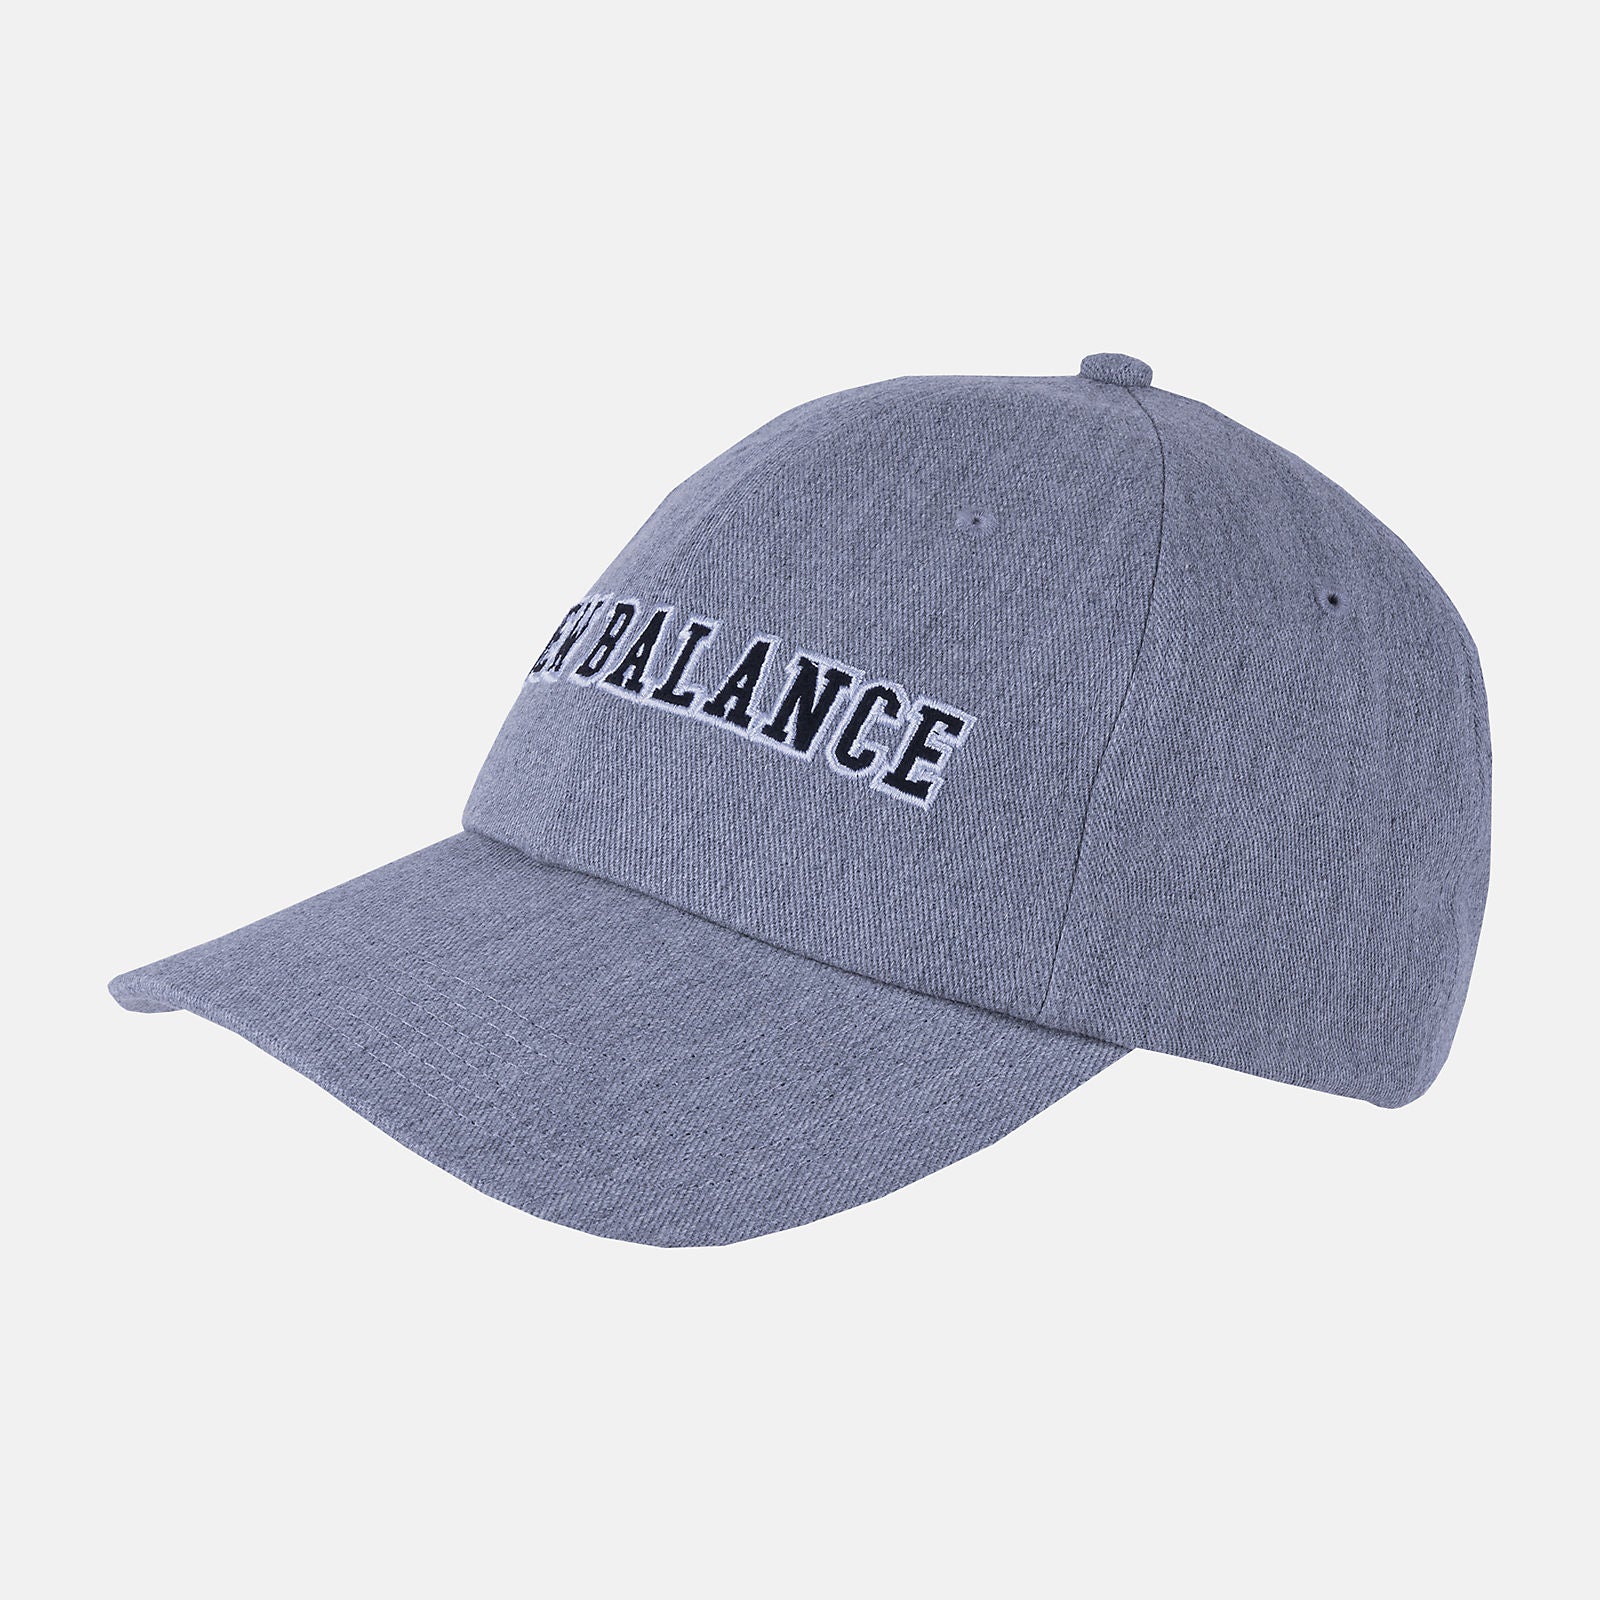 NEW BALANCE NB Logo Hat in Athletic Grey LAH21002 O/S ATHLETIC GREY FROM EIGHTYWINGOLD - OFFICIAL BRAND PARTNER